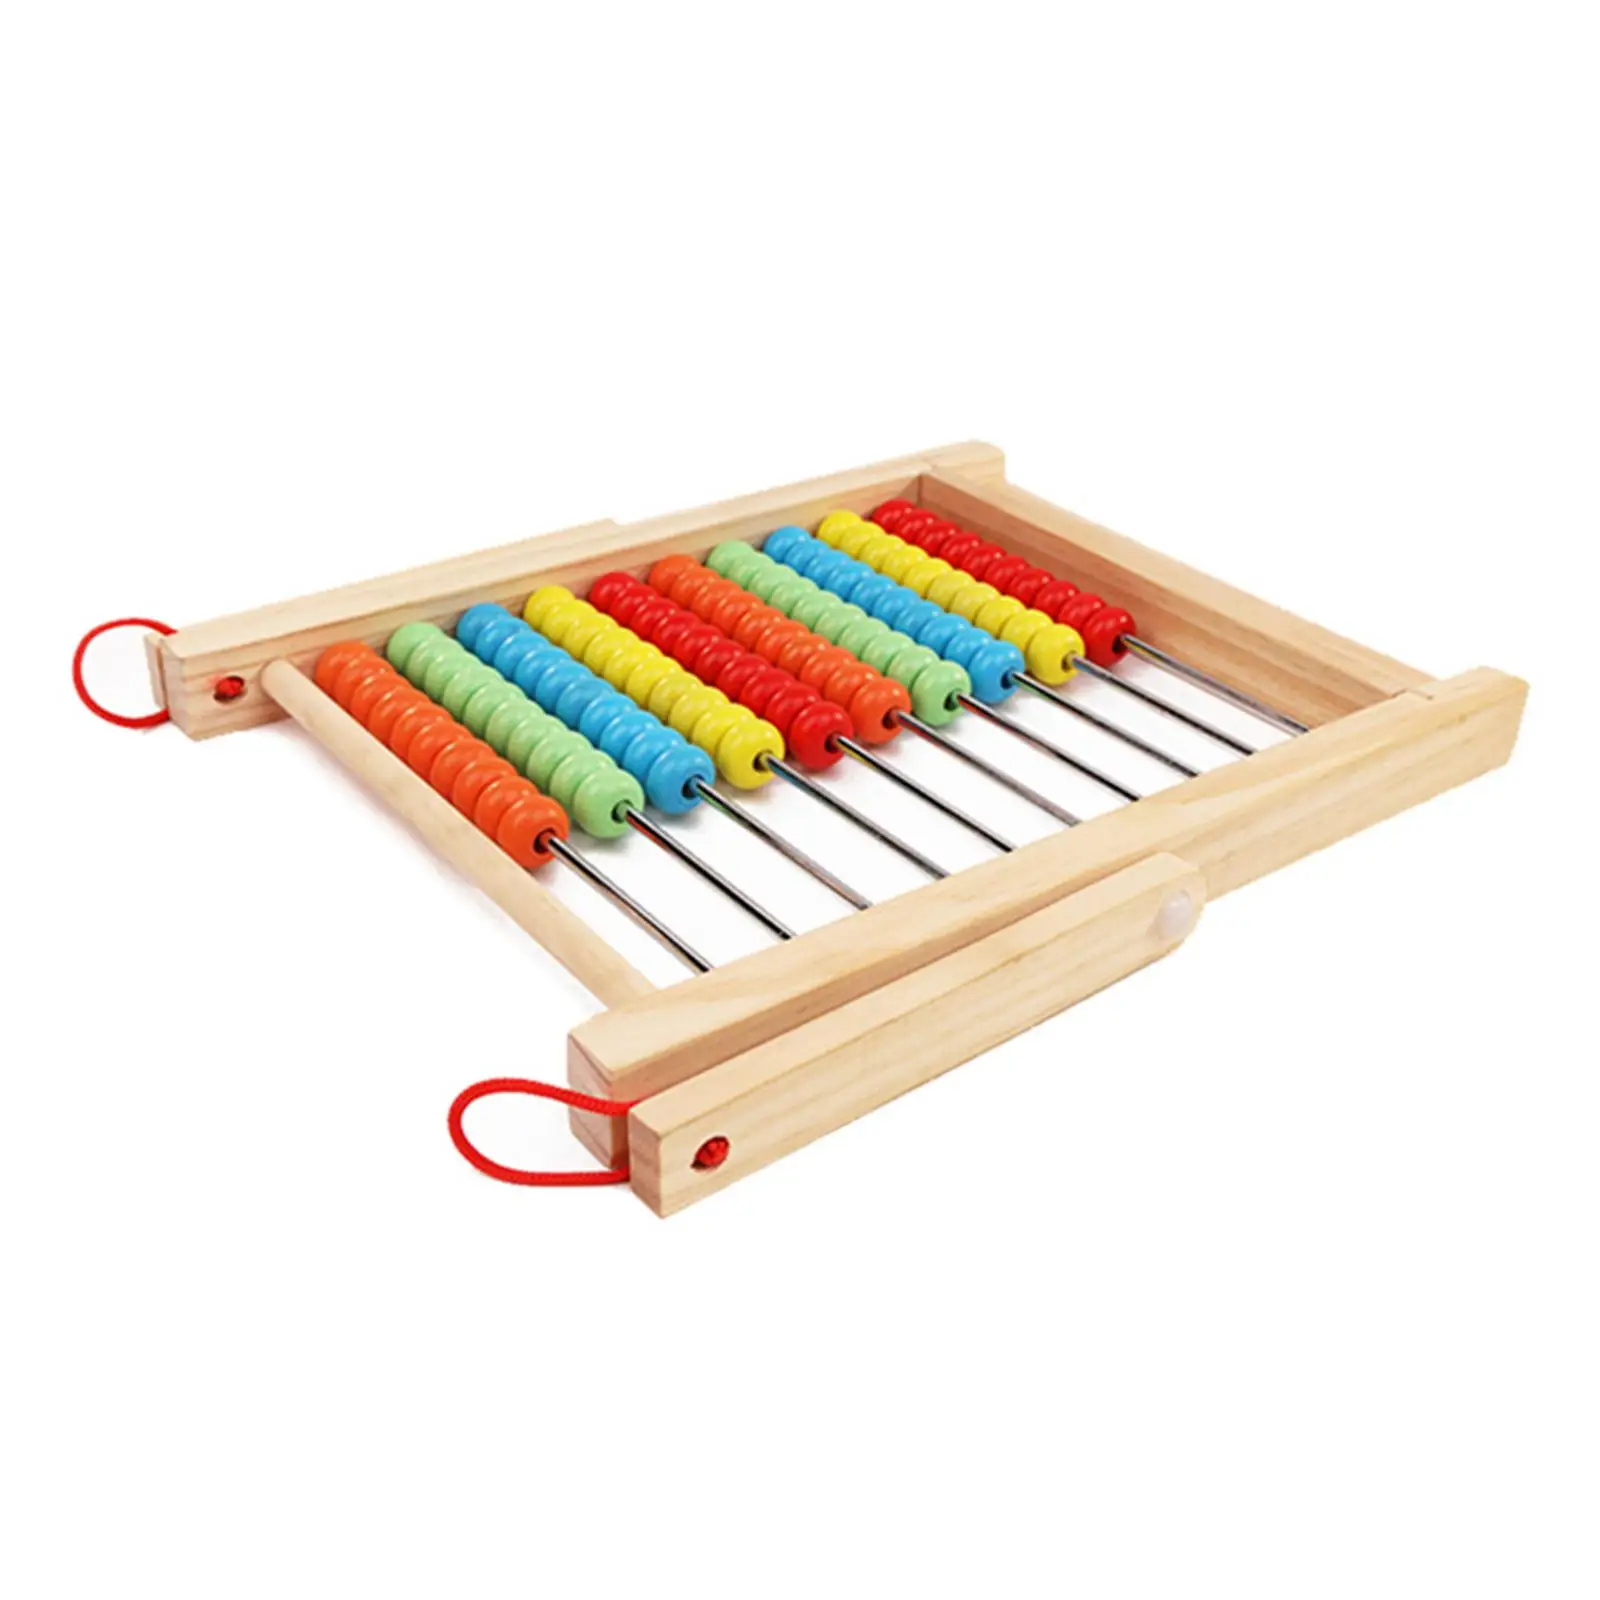 Classic Wooden Abacus 10 Row Math Manipulatives Montessori Educational Toy for Kids Toddlers Preschool Kindergarten Elementary